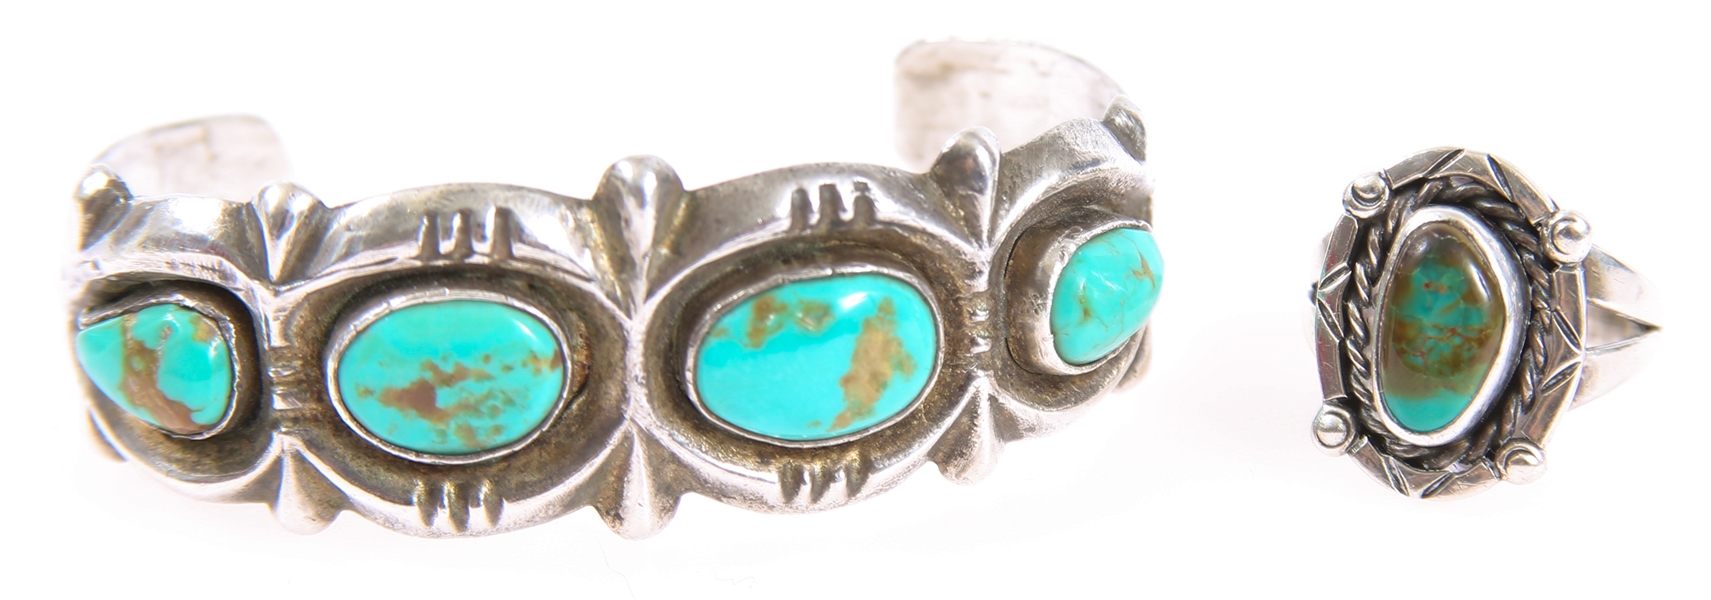 STERLING SILVER & TURQUOISE CUFF & RINGS - LOT OF 2